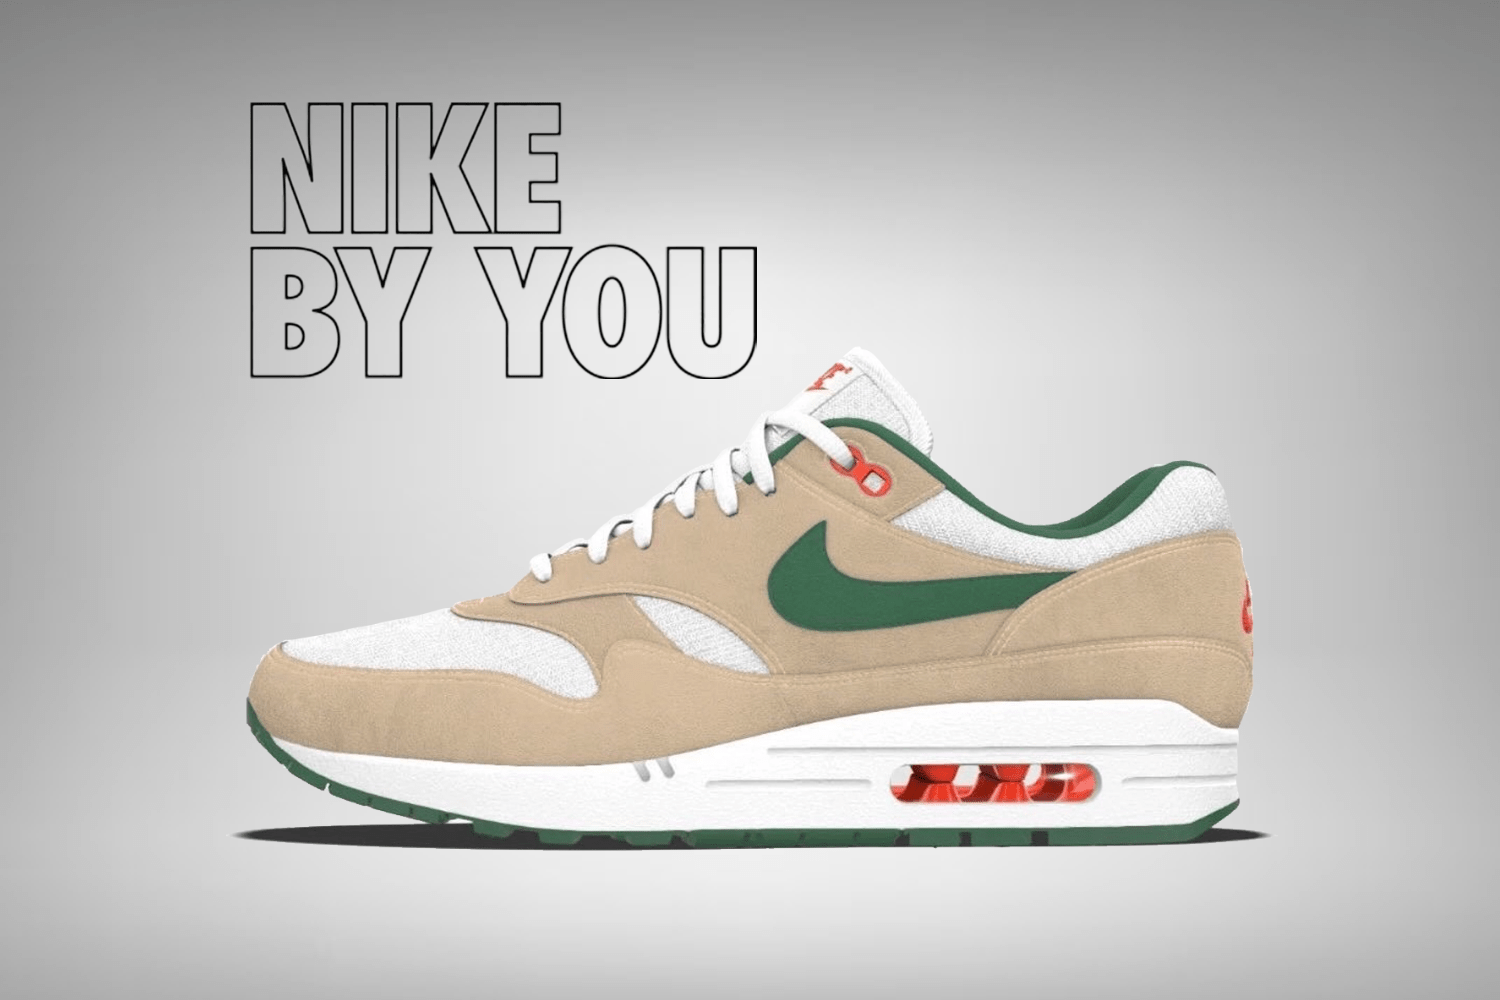 You can design your own Nike Air Max 1 again